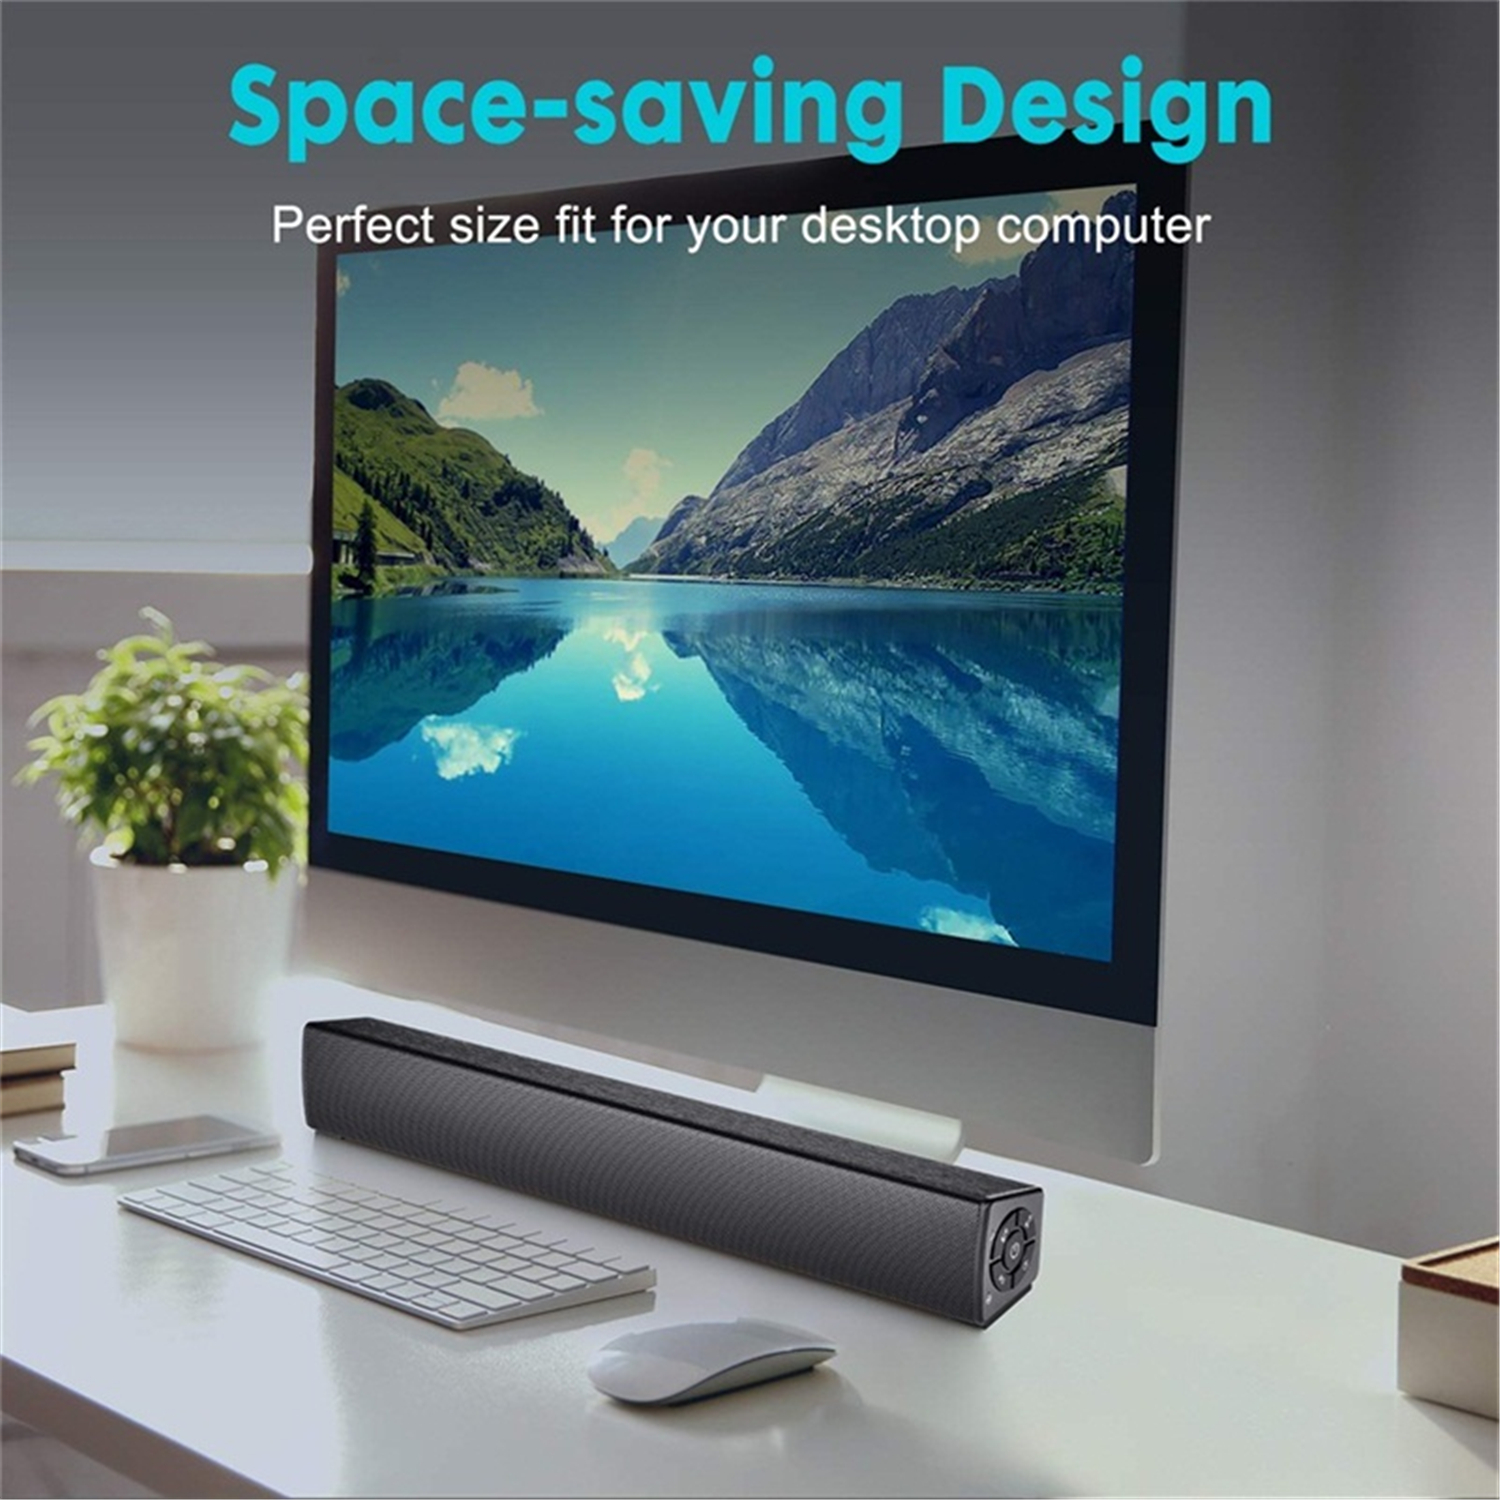 Bakeey-Y9-bluetooth-Soundbar-Bass-Stereo-45MM-Drivers-20W-Speaker-TF-Card-AUX-In-2000mAh-Remote-Cont-1796639-2